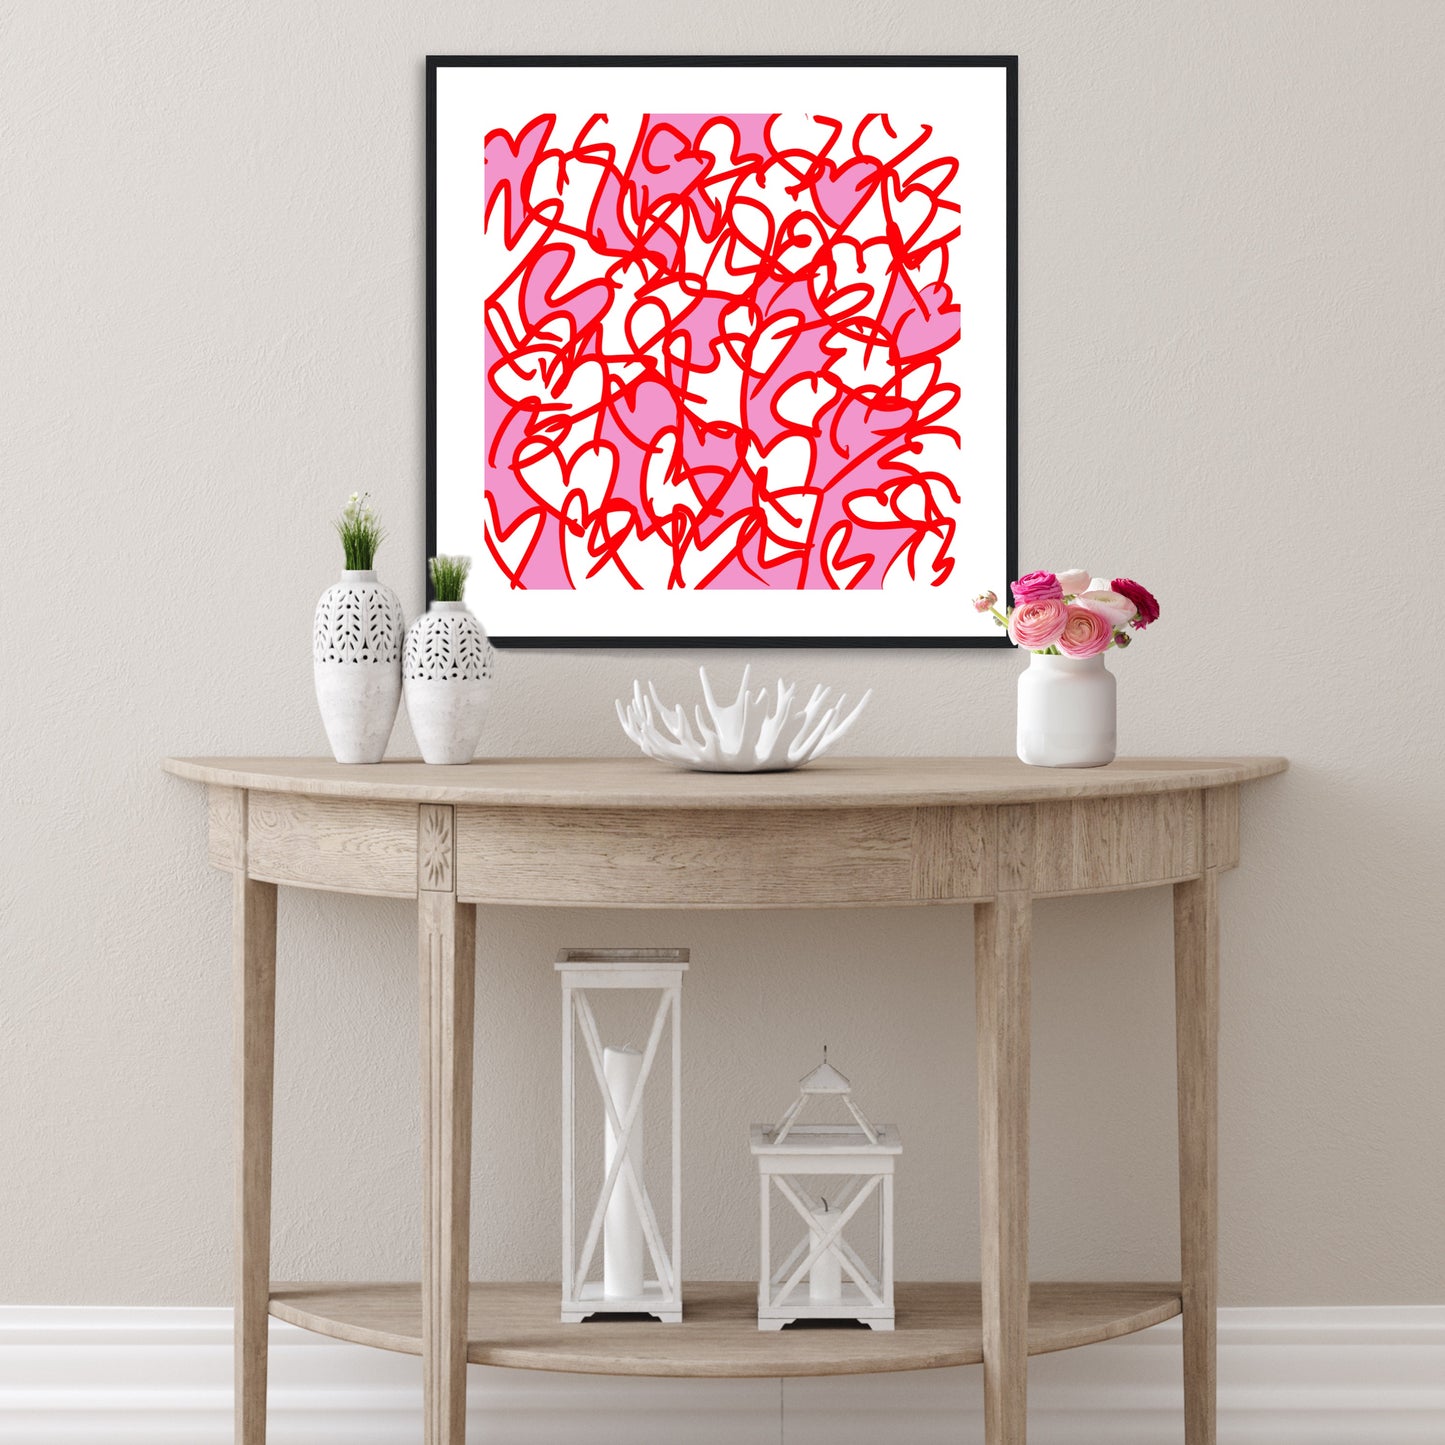 'Love Is All Around' - Framed Print (with mount)